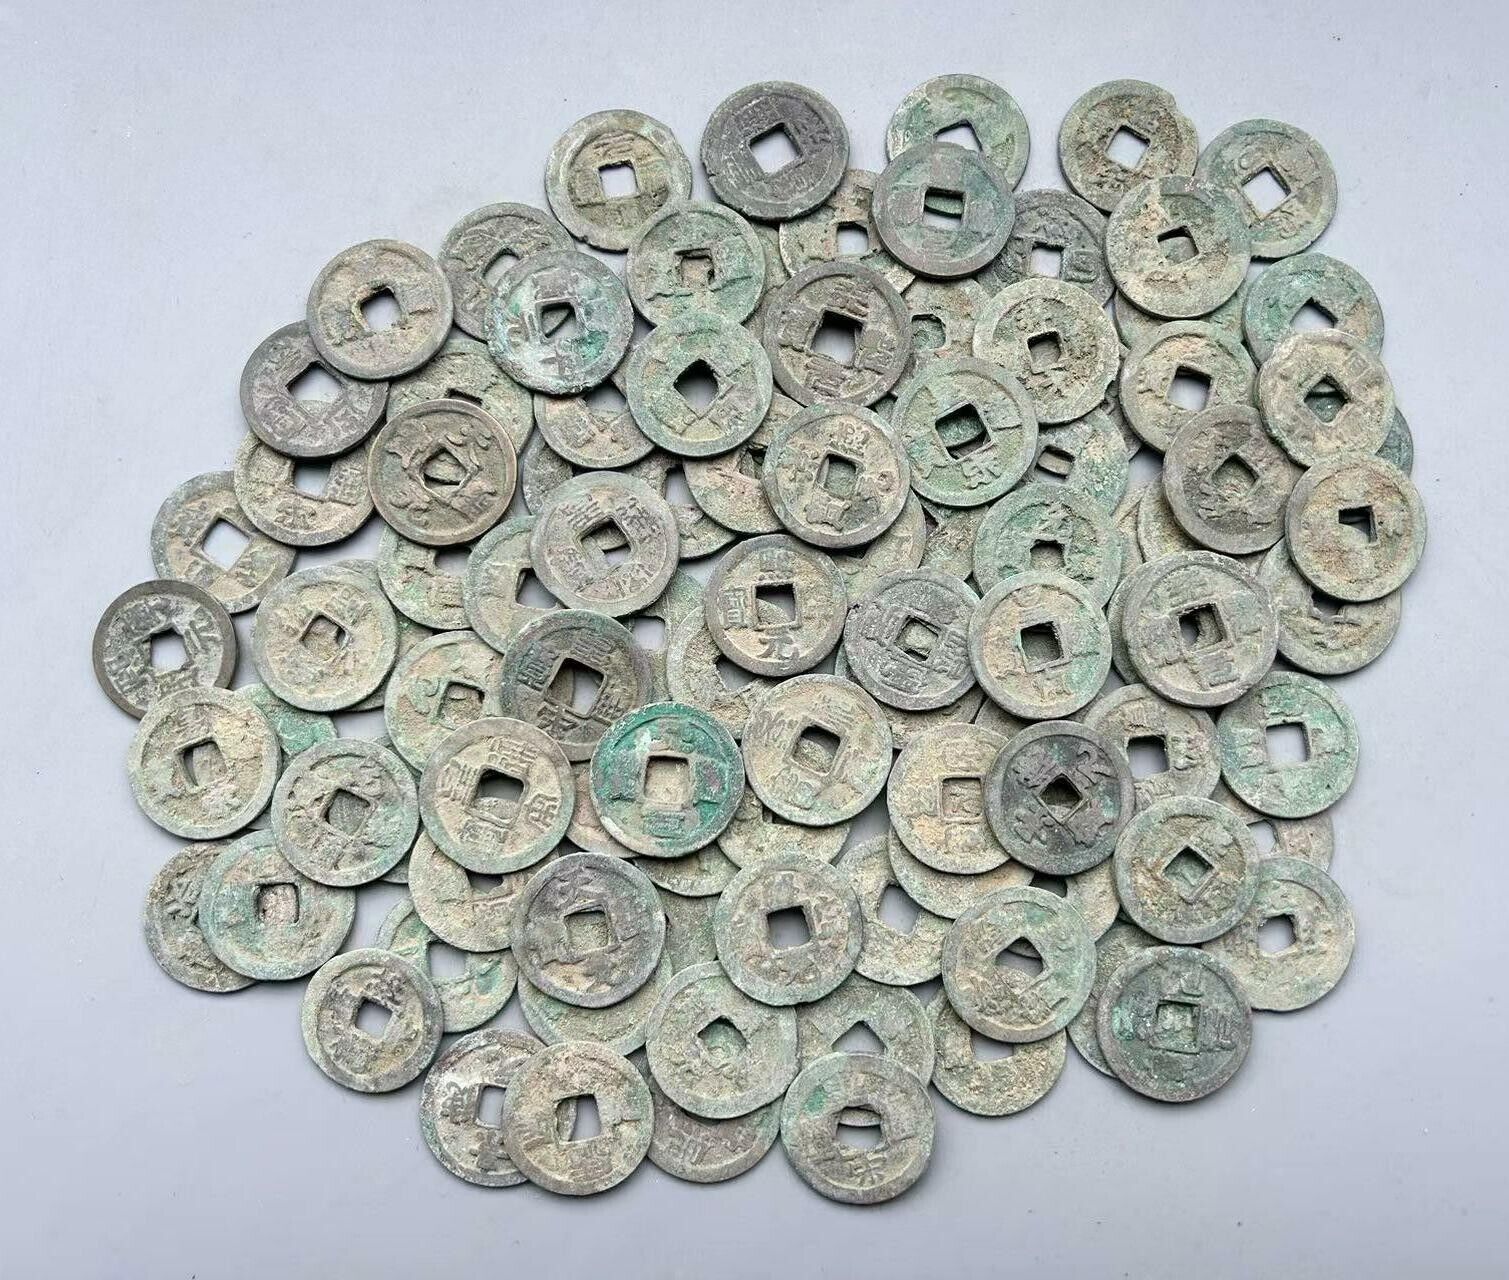 10 Mixed Ancient Chinese North Song Bronze Coins(960-1127)-5 Varieties-ON SALE Без бренда